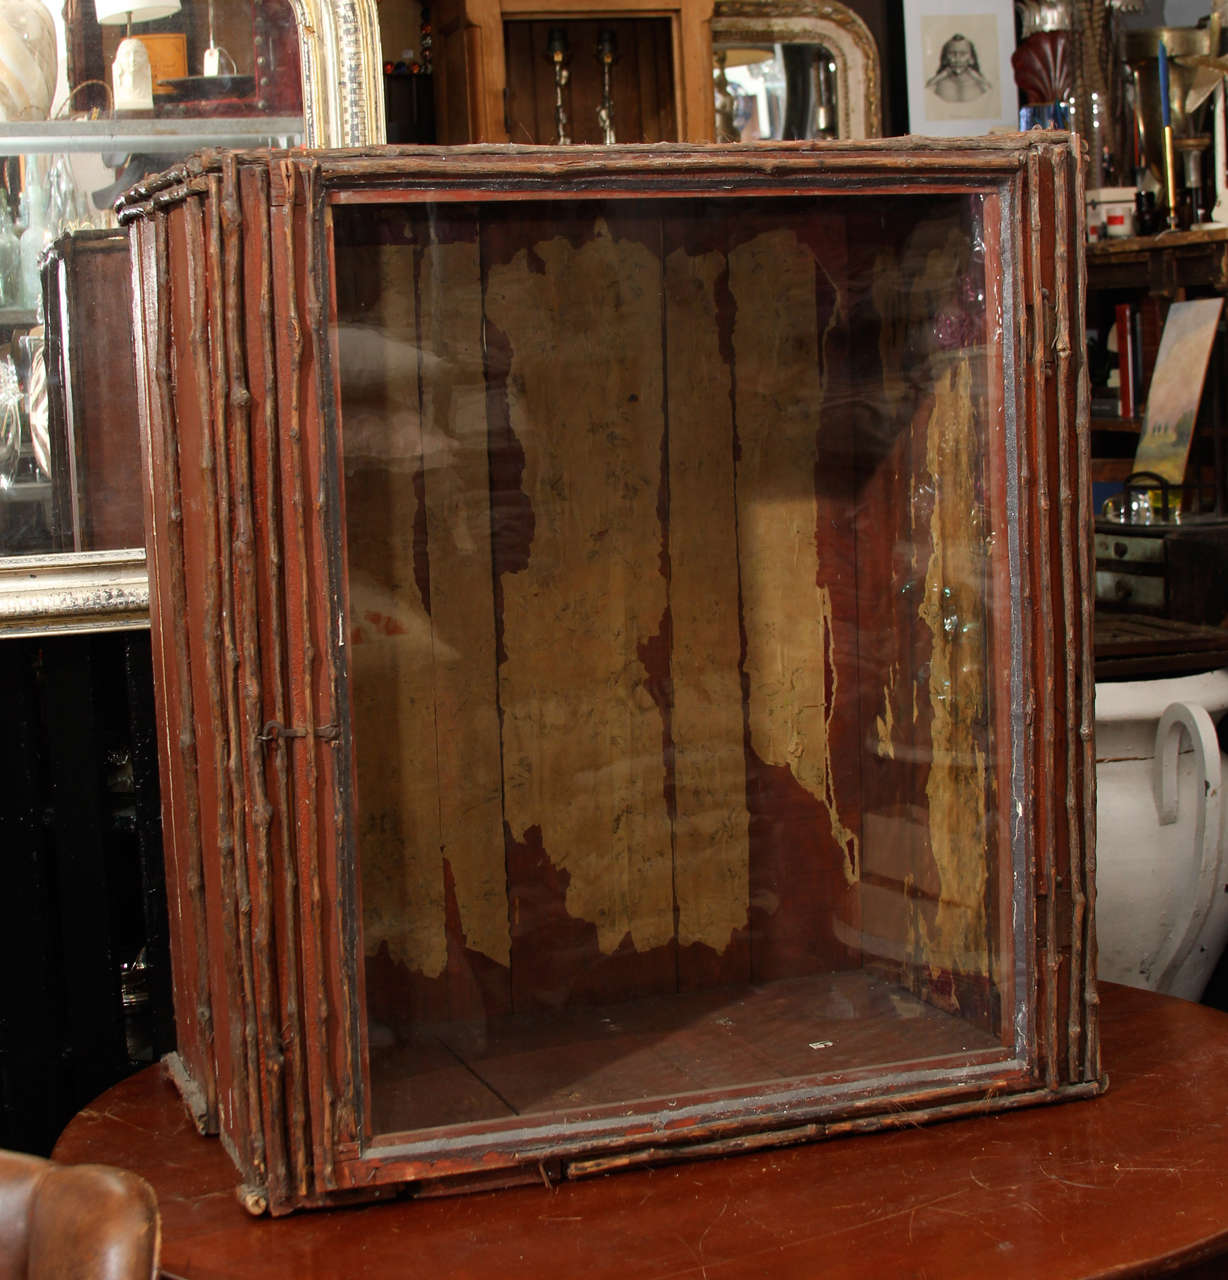 Large wood and branch trimmed display case with old glass hinged door. Remnants of old wallpaper on back inside of case. This case is impressive on a table and looks equally good on the floor used like a chest or tall side table. Great color and